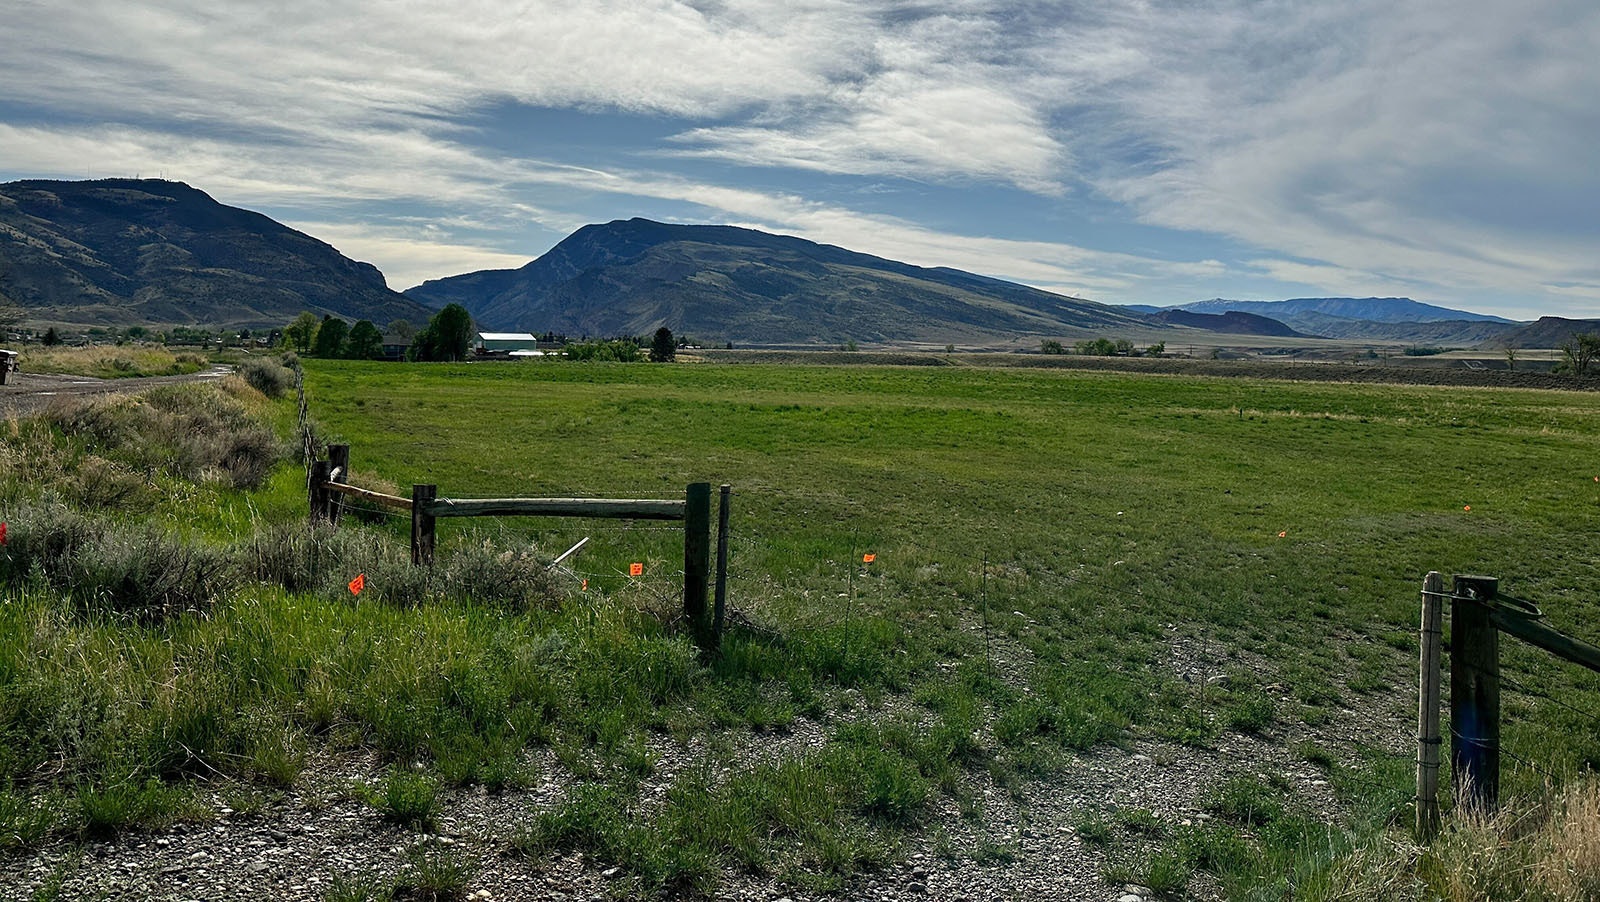 The Church of Jesus Christ of Latter-day Saints wants to build a temple on this plot of land in Cody. Some locals oppose the project, saying the building would be illuminated 24/7 and that the large structure and its 101-foot-tall spire would block the area's viewshed.